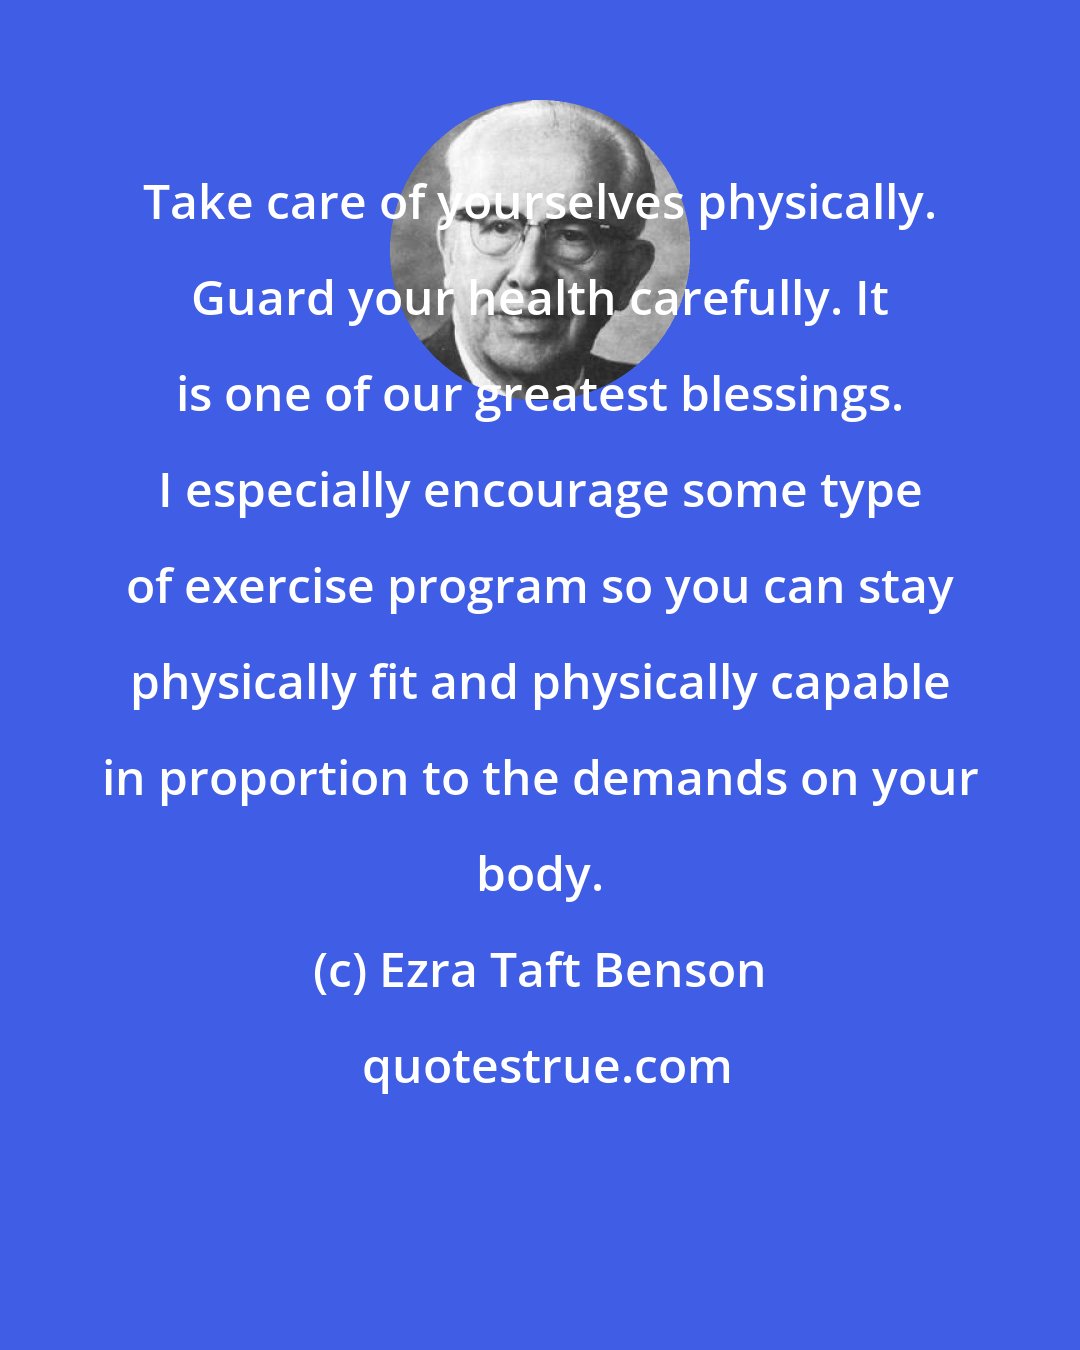 Ezra Taft Benson: Take care of yourselves physically. Guard your health carefully. It is one of our greatest blessings. I especially encourage some type of exercise program so you can stay physically fit and physically capable in proportion to the demands on your body.